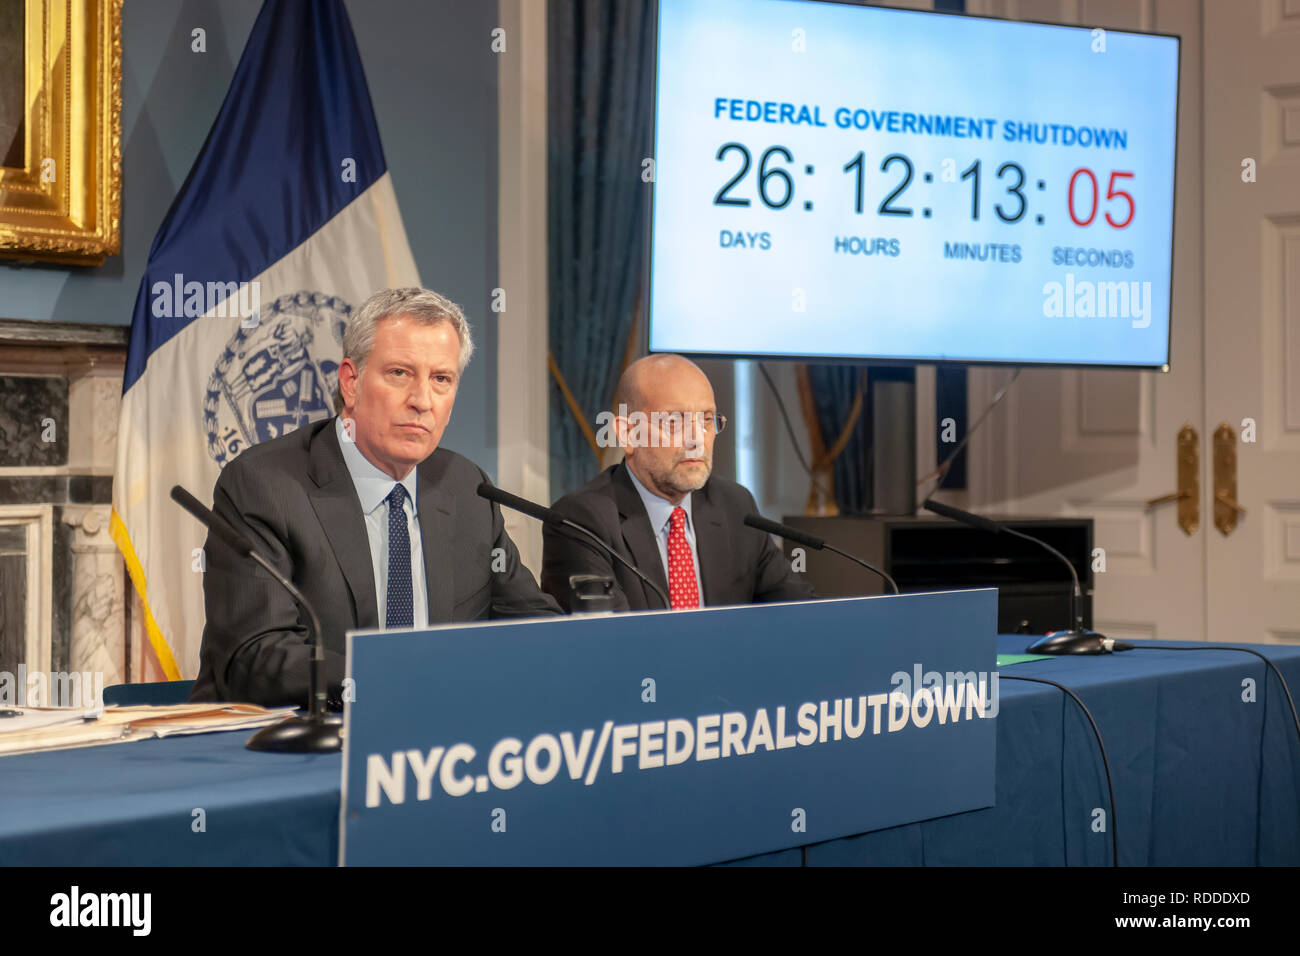 New York, USA. 17th Jan 2019. New York Mayor Bill de Blasio, left,  with Steven A. Banks, New York City Human Resources Administration/Department of Social Services, and other members of his administration hold a press conference in the Blue Room in New York City Hall on Thursday, January 17, 2019 on the effects of the government shutdown on funding of services in New York. As the shutdown progresses funding for Section 8 vouchers, SNAP benefits and an assortment of other services will cease putting New Yorkers who rely on them at risk.  Credit: Richard Levine/Alamy Live News Stock Photo